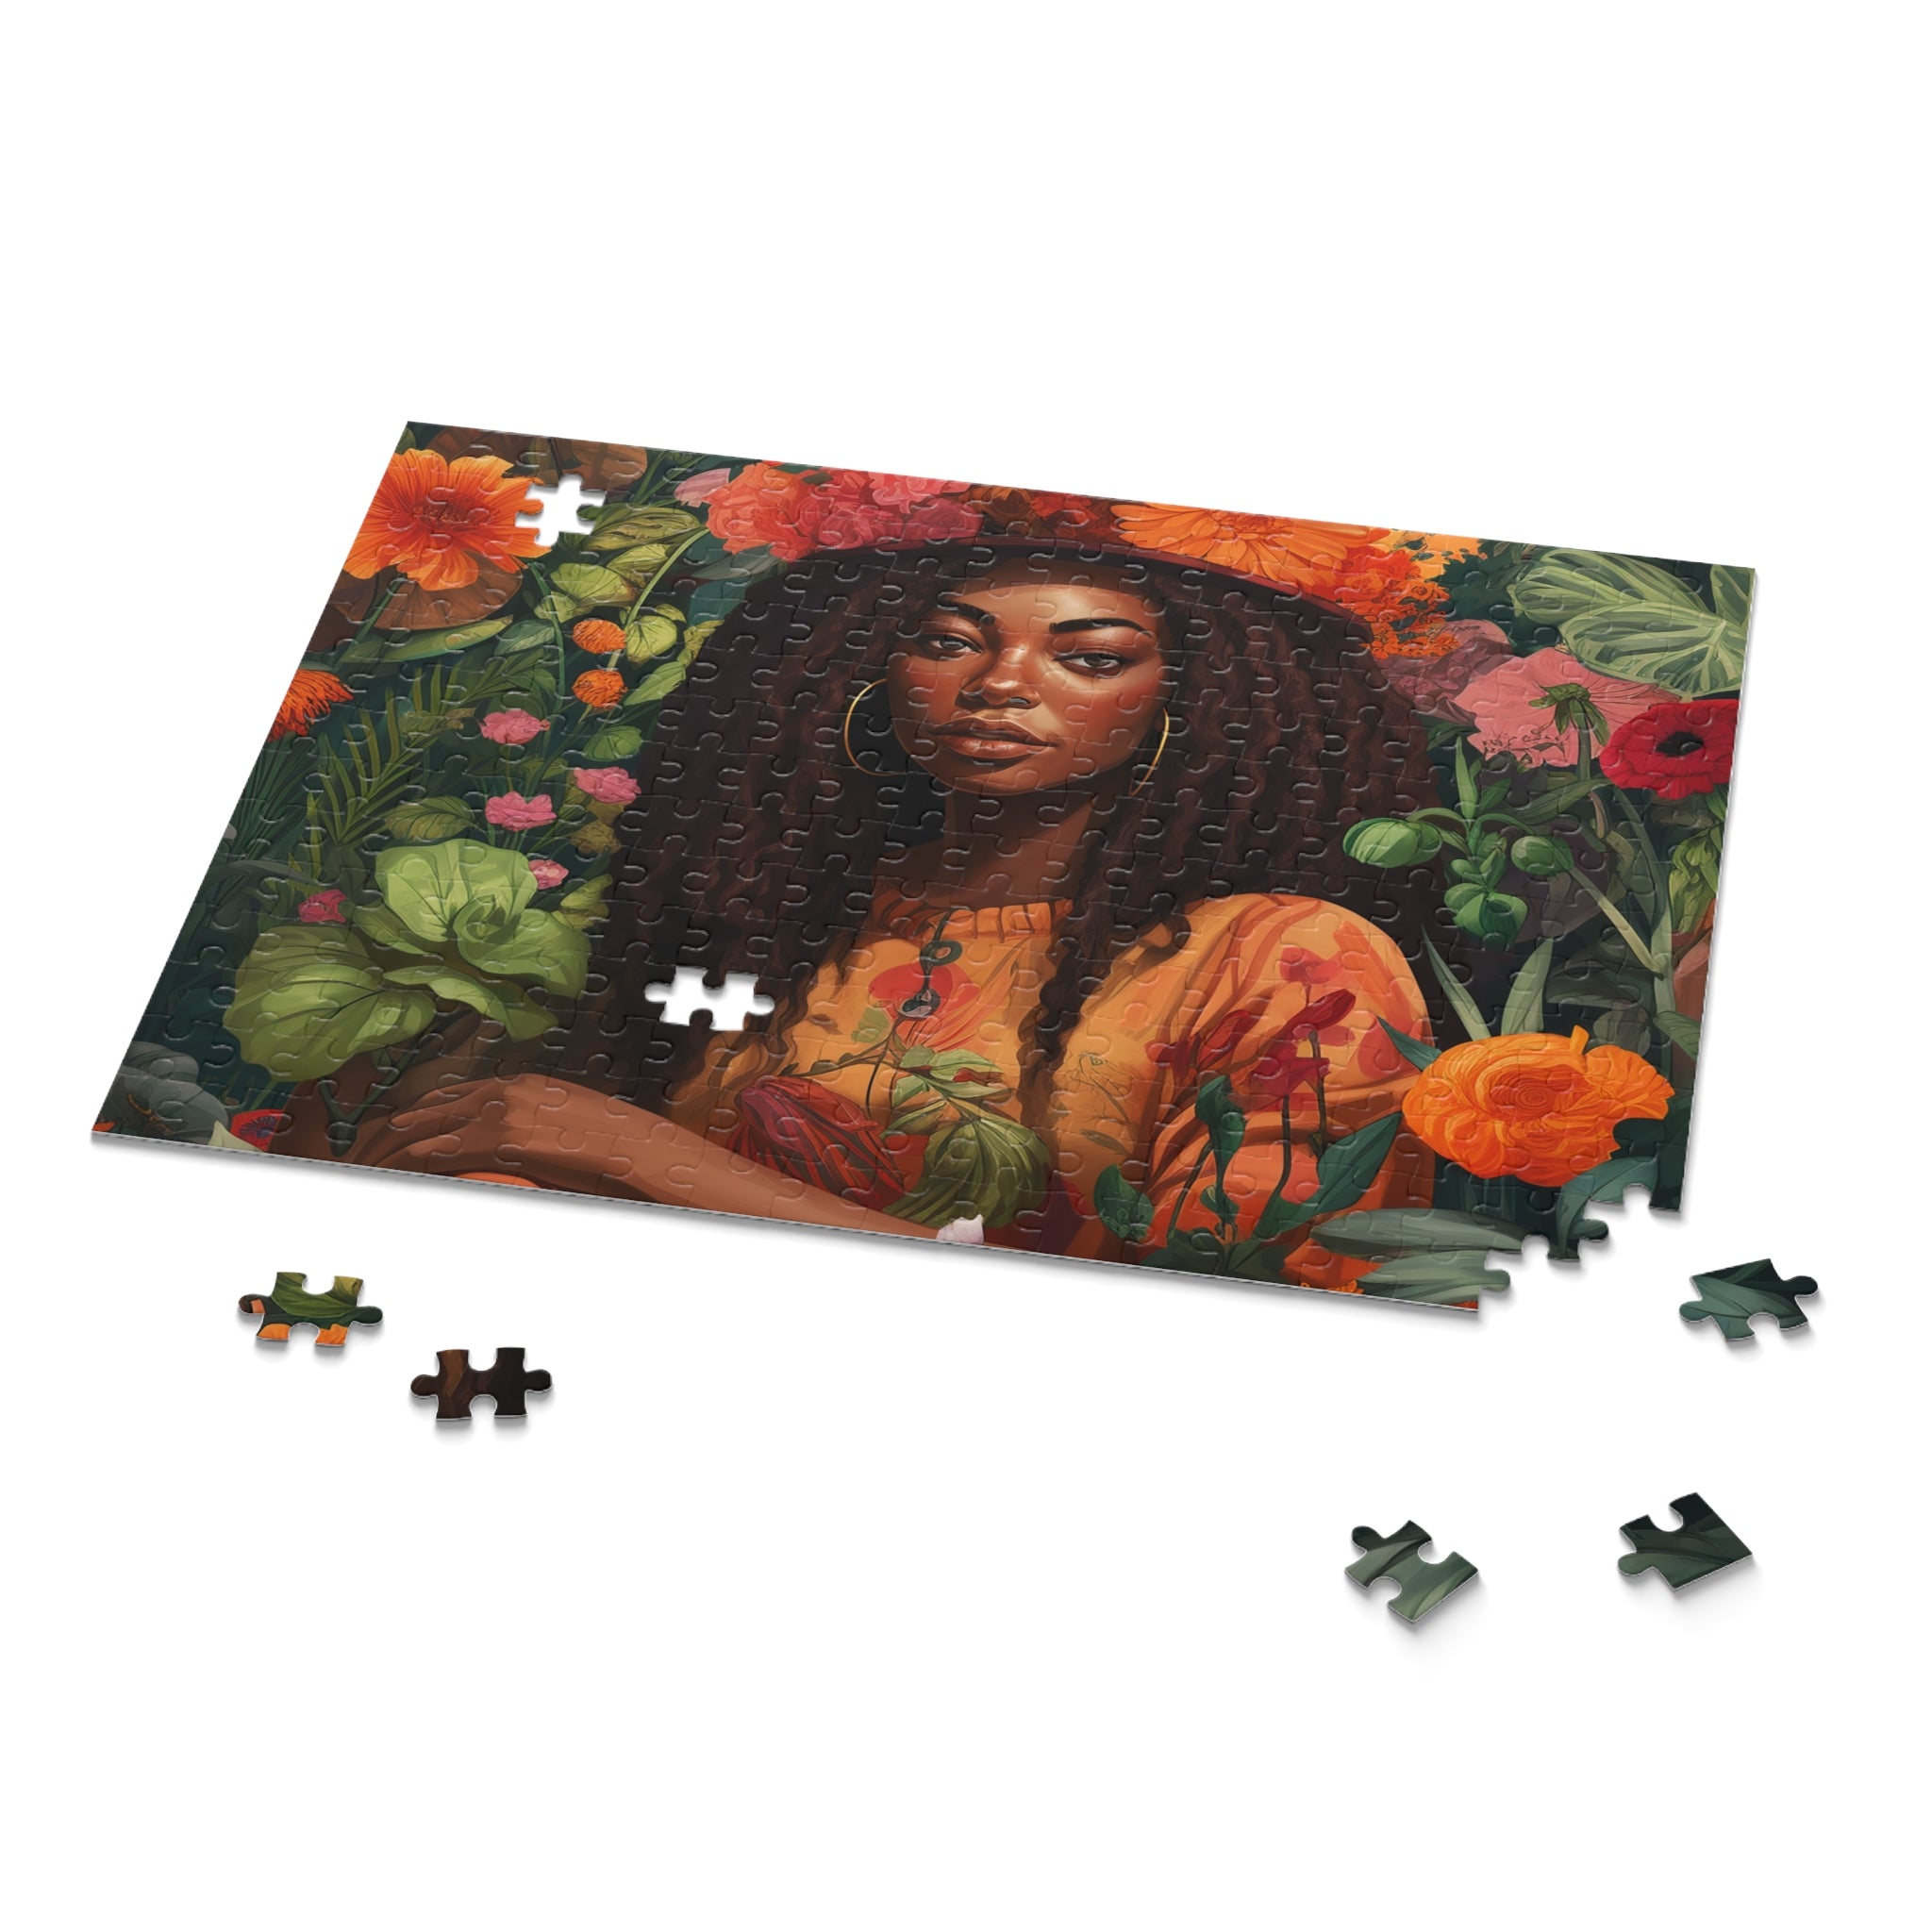 African American Garden Goddess Jigsaw Puzzle in 11 x 14 size. 